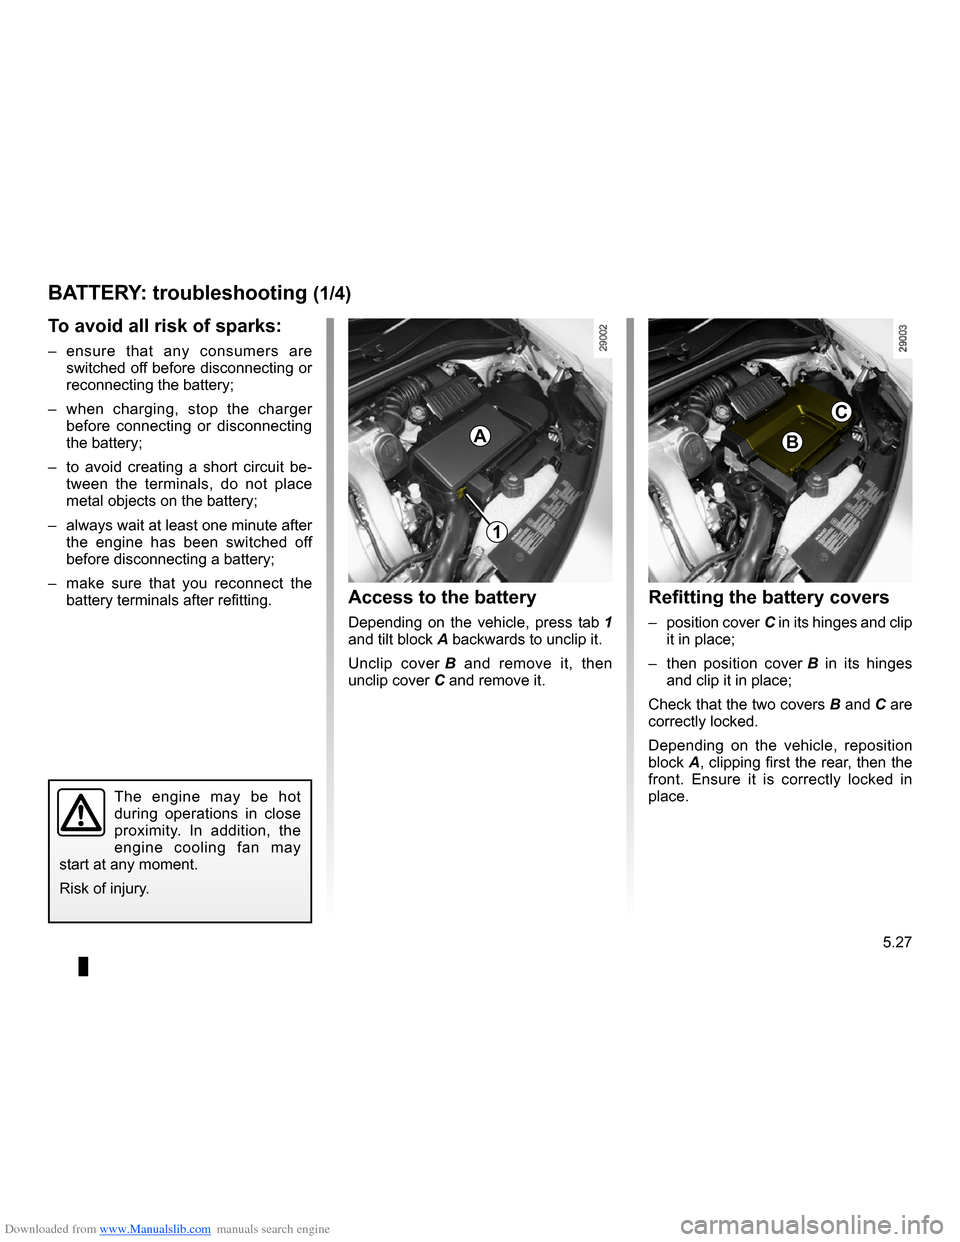 RENAULT CLIO 2009 X85 / 3.G User Guide Downloaded from www.Manualslib.com manuals search engine 
battery...................................................(up to the end of the DU)
5.27
ENG_UD12592_2Batterie : dépannage (X85 - B85 - C85 -